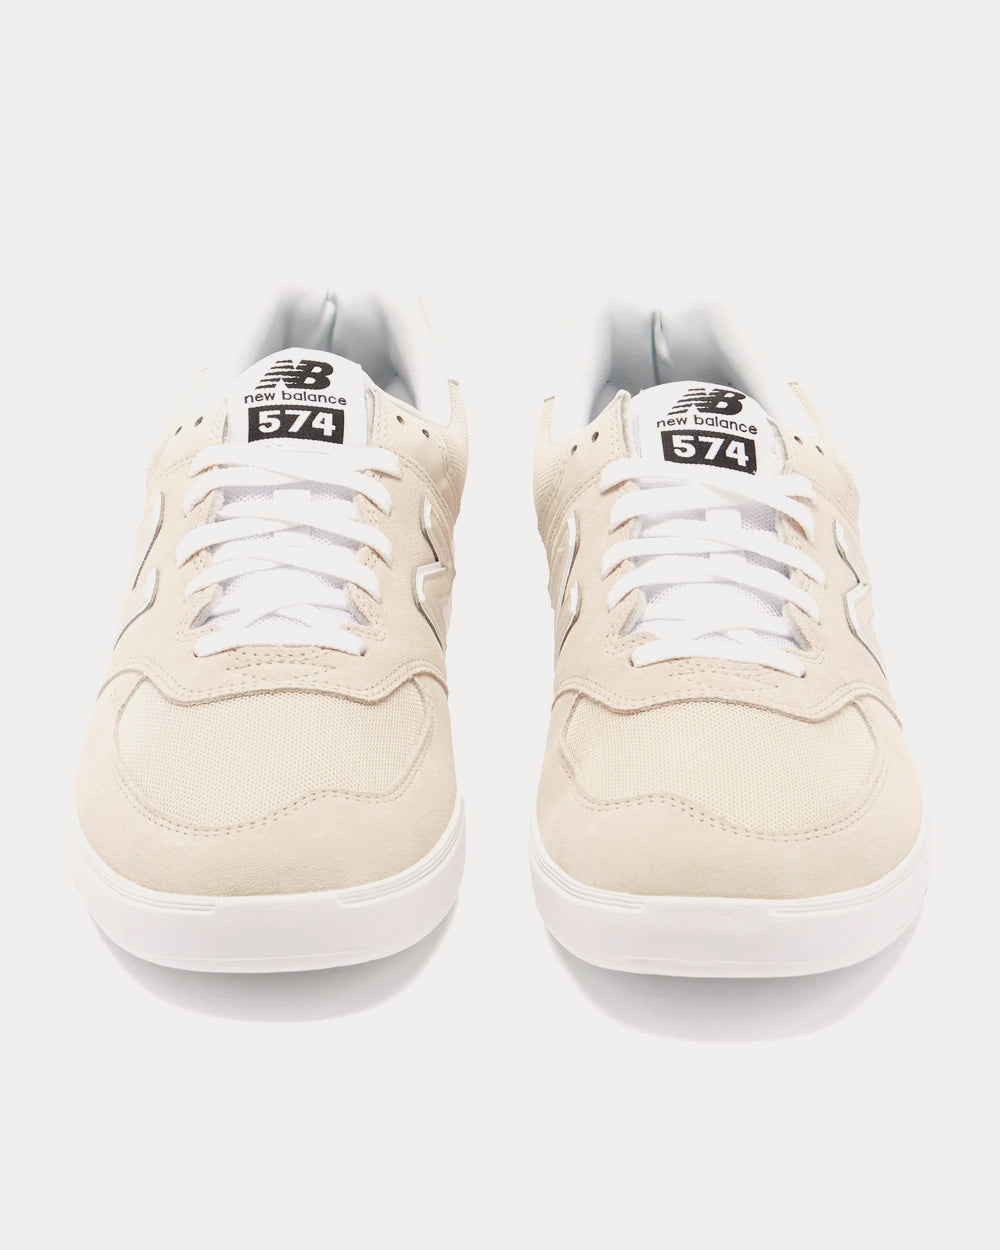 New Balance x Junya Watanabe - AM574 Suede Neutral Low Top Sneakers